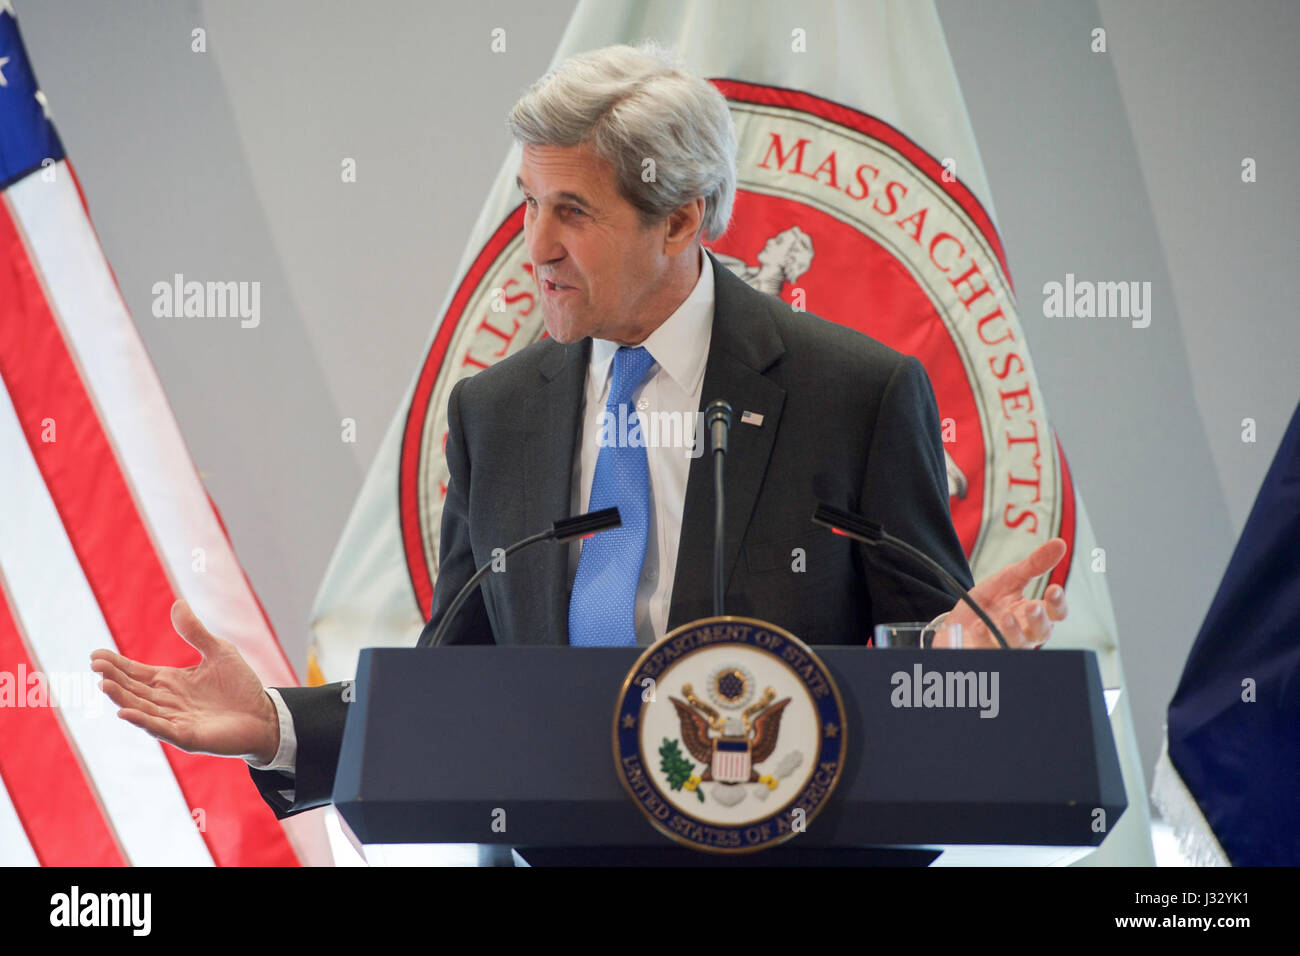 U.S. Secretary of State John Kerry delivers a speech focused on Obama administration climate change policy on January 9, 2016, during an appearance at the Massachusetts Institute of Technology Sloan School of Management in Cambridge, Massachusetts. Stock Photo